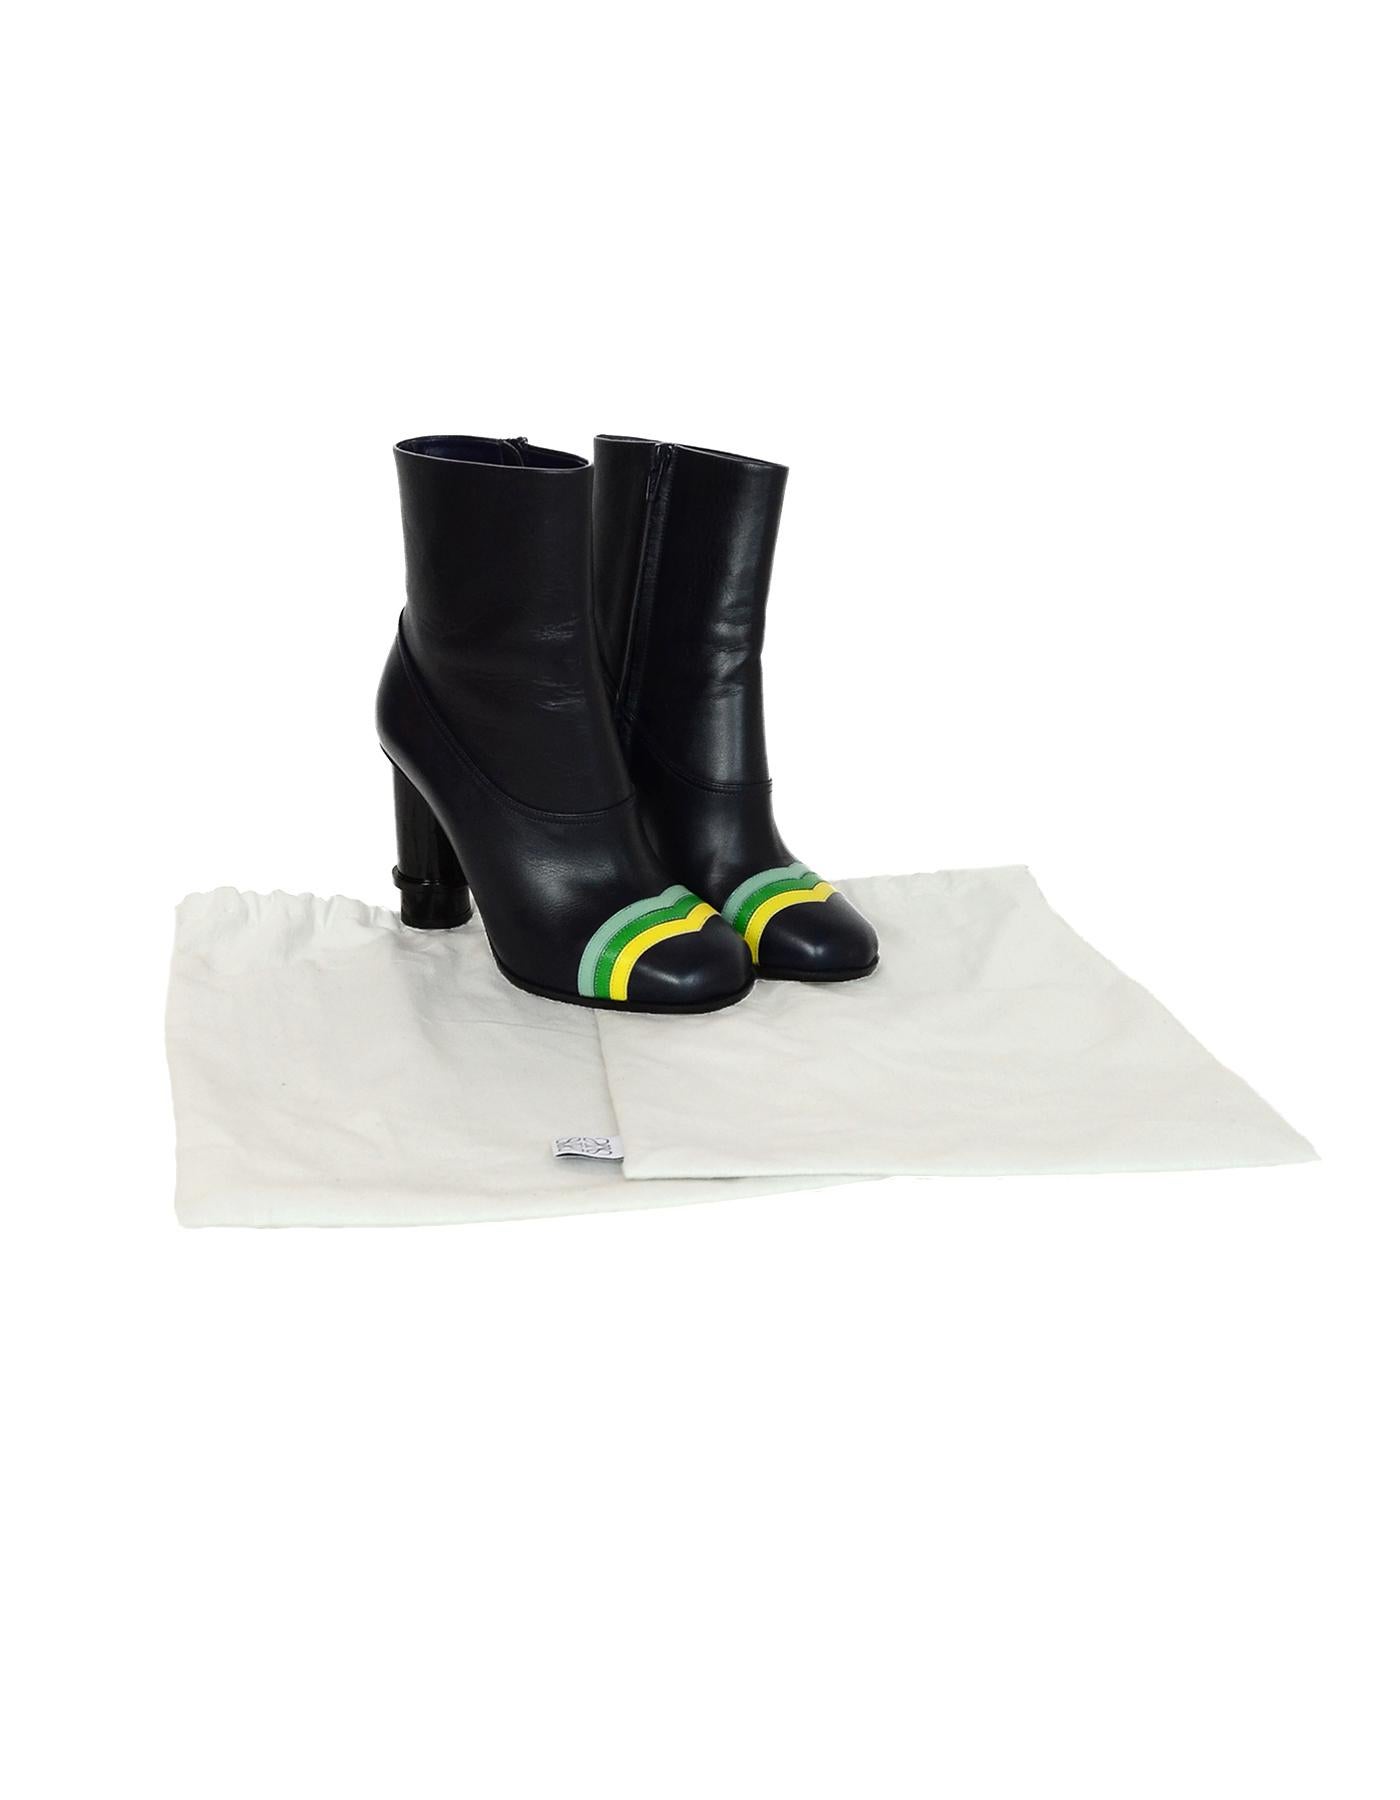 Loewe Navy Heeled Boot W/ Green/Yellow Chevron Striped Toe Design Sz 37

Made In: Italy
Color: Navy, light and dark green, yellow
Hardware: Black
Materials: Leather
Closure/Opening: Full side zipper
Overall Condition: Excellent, like new condition